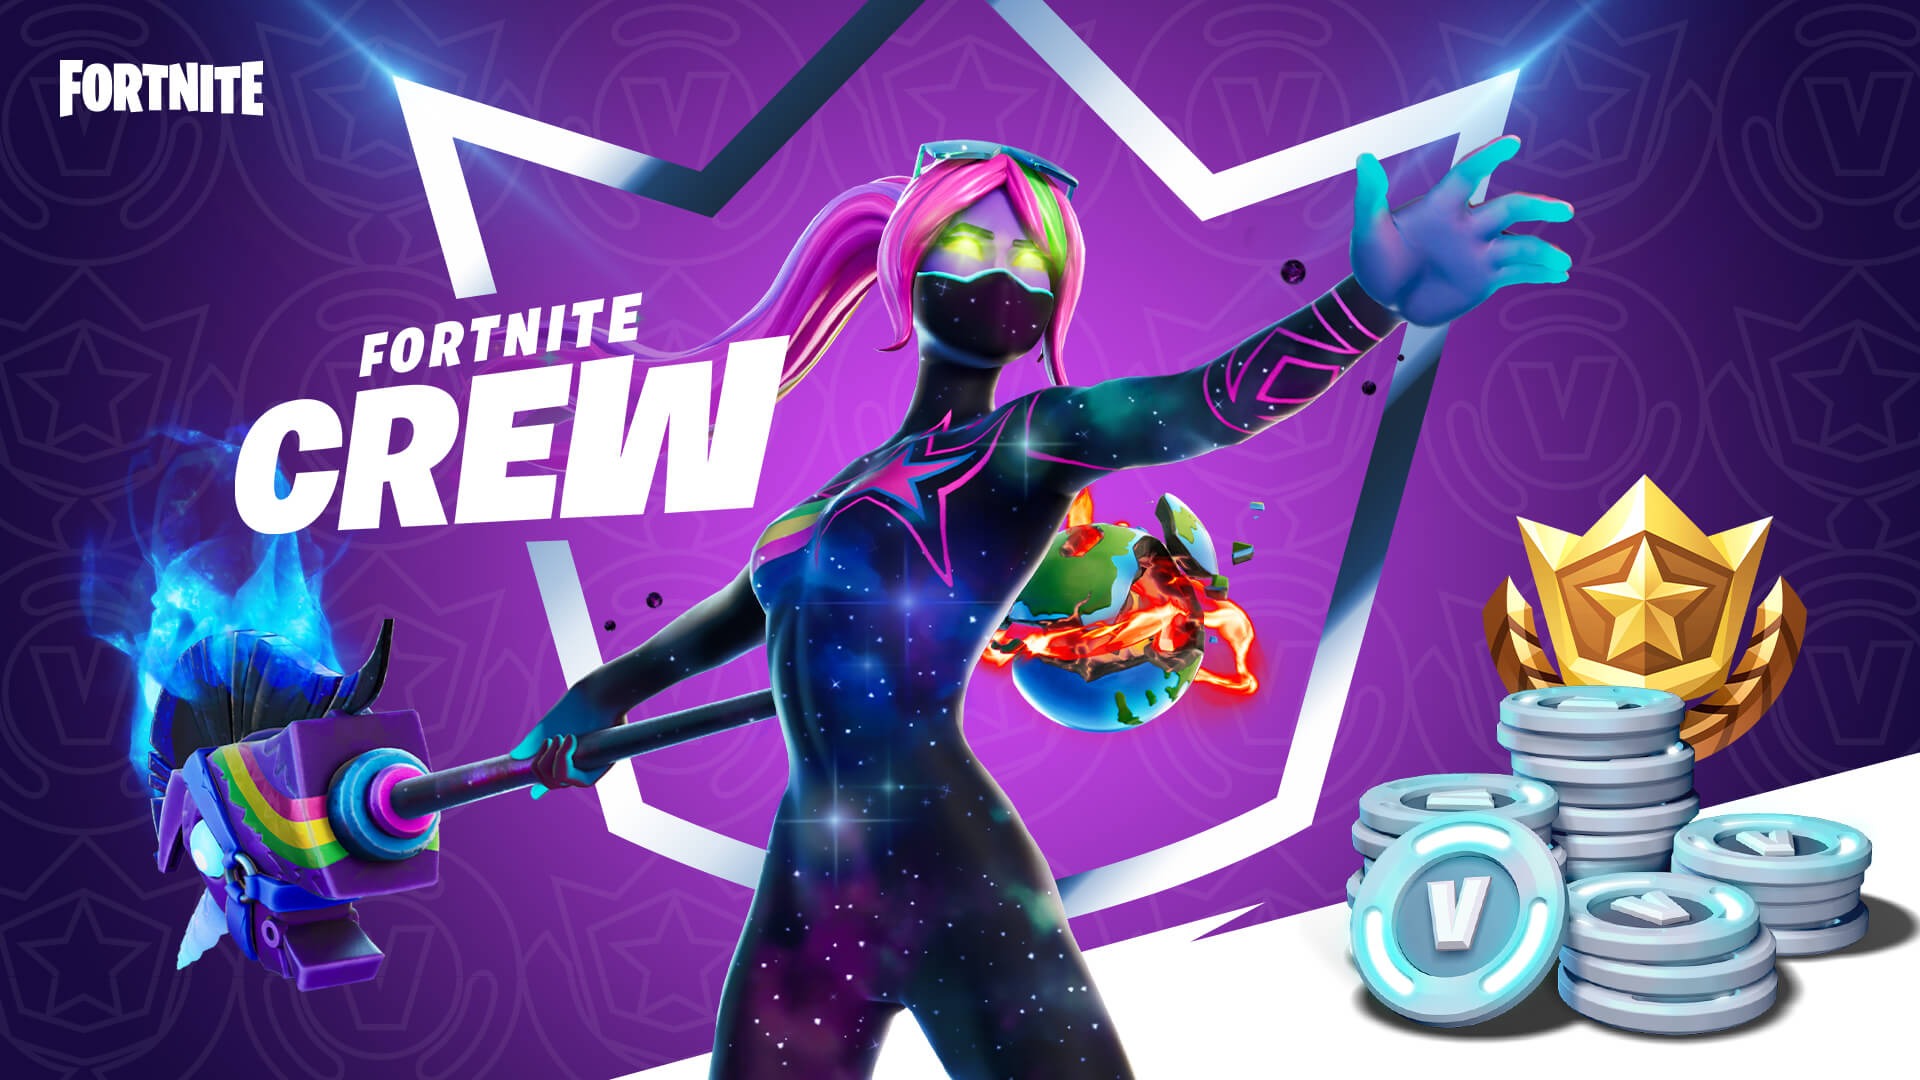 Special Space Character Fortnite Fortnite Goes Galactic With Space Themed Skin For New Subscription Service Launch Space